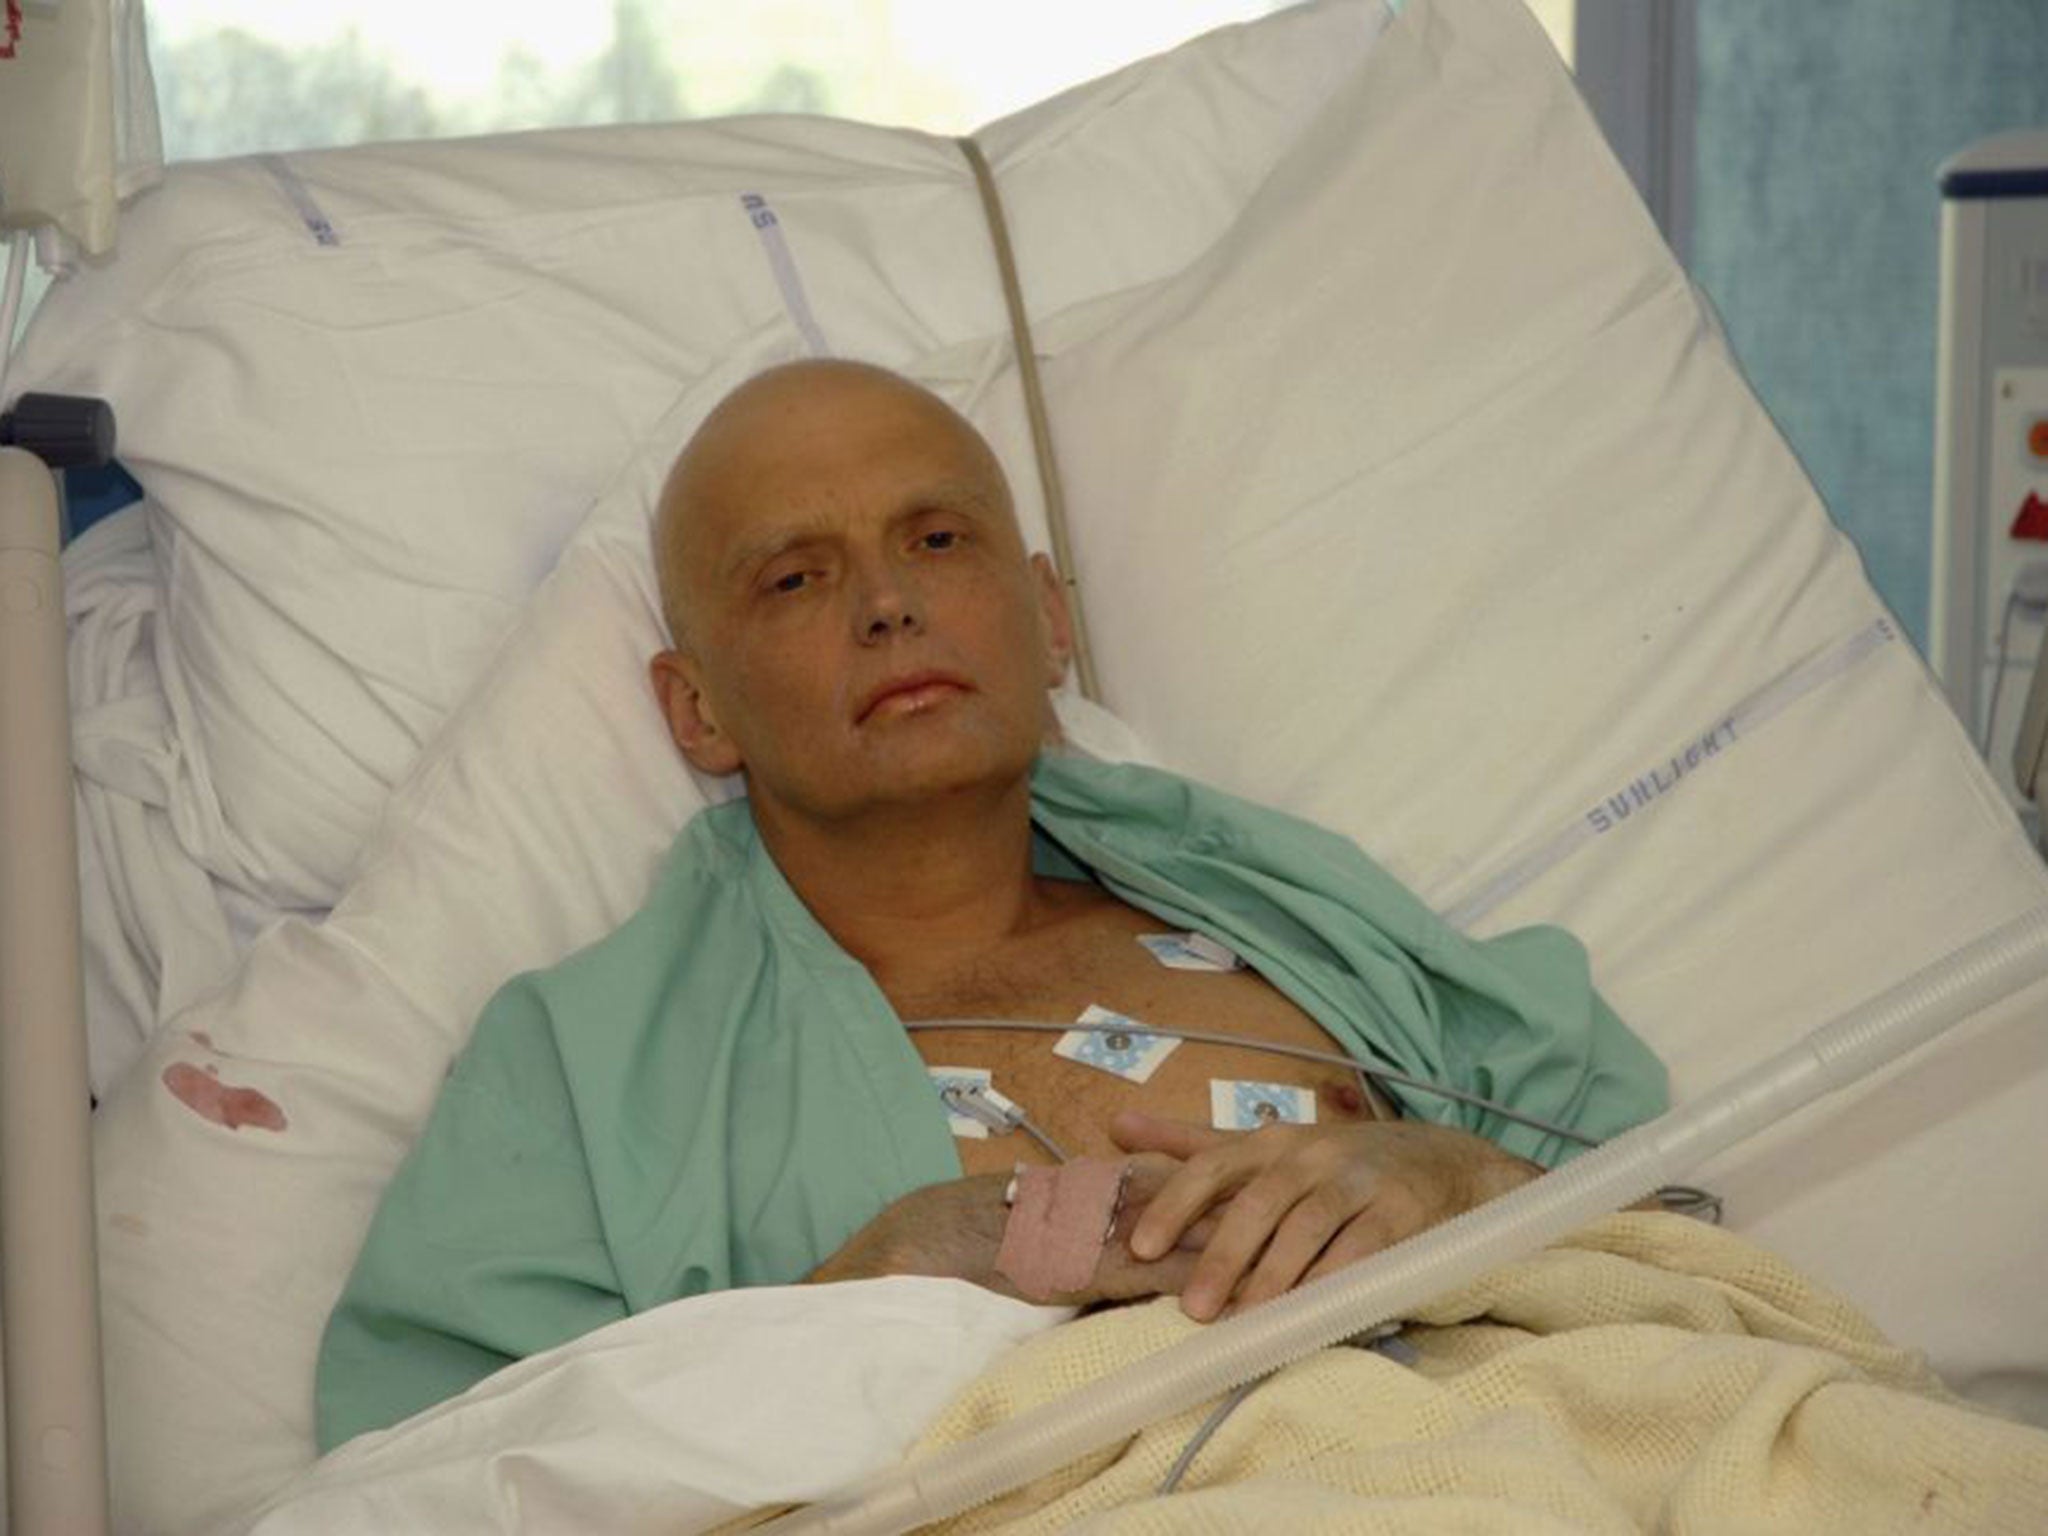 In this image made available on 25 November 2006, Alexander Litvinenko is pictured at the Intensive Care Unit of University College Hospital on 20 November 2006 in London, England